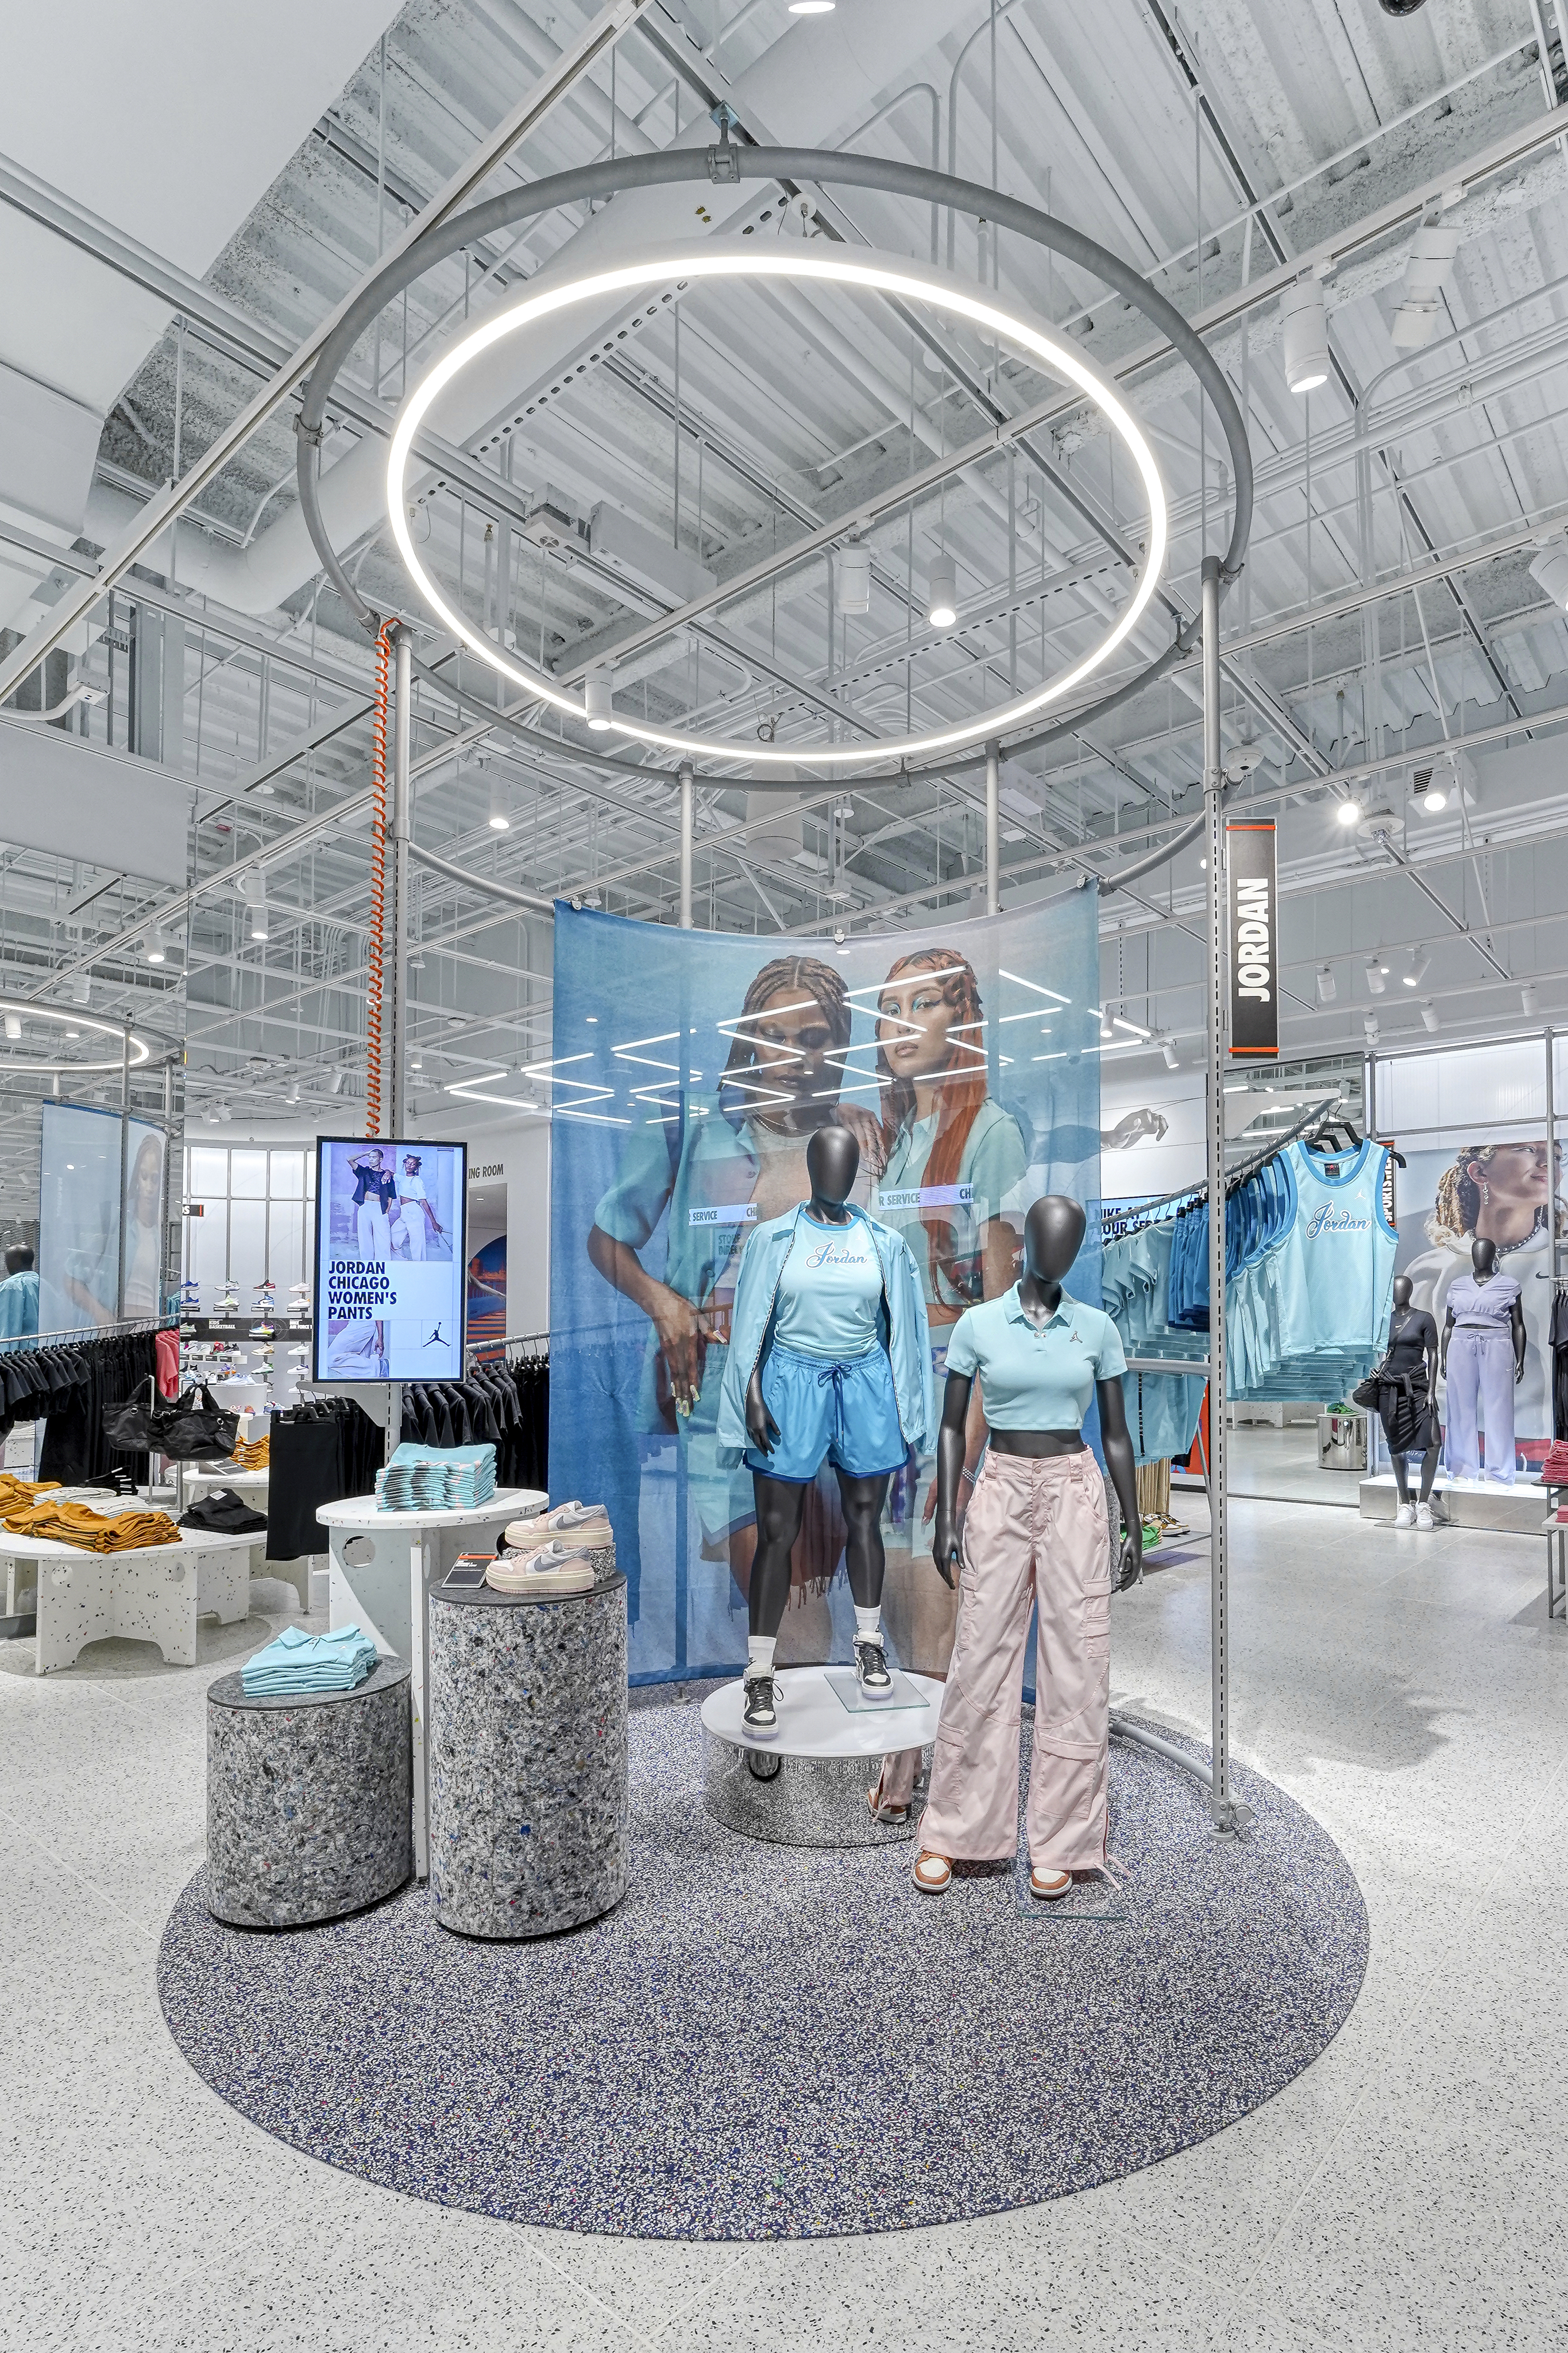 Nike is taking over the H&M space at NorthPark